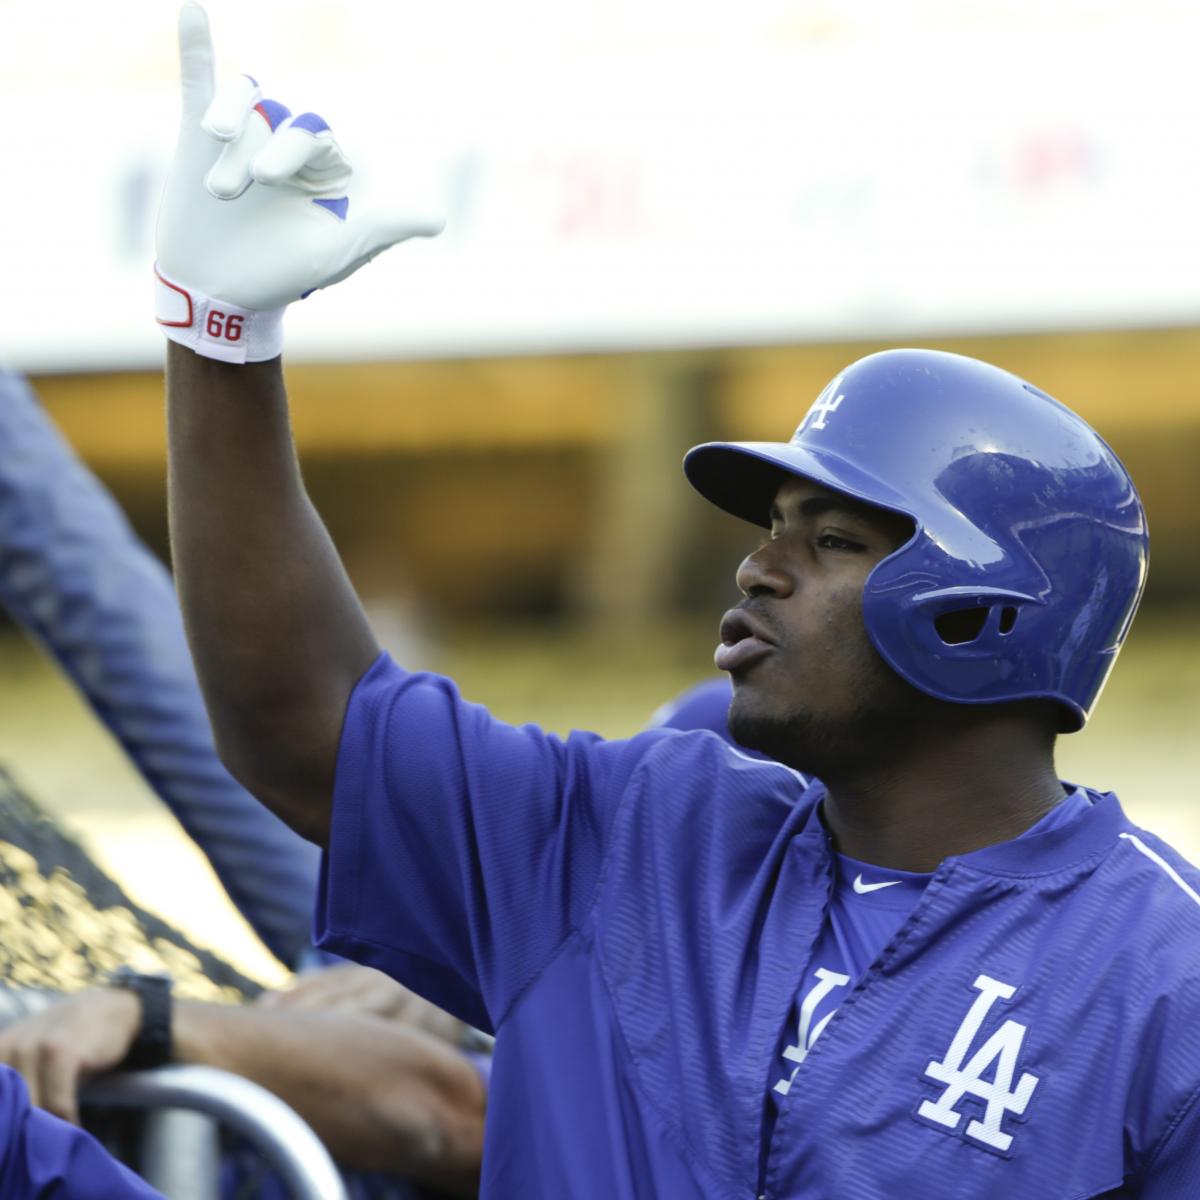 Former Dodgers All-Star Yasiel Puig Attended 2022 MLB Winter Meetings 